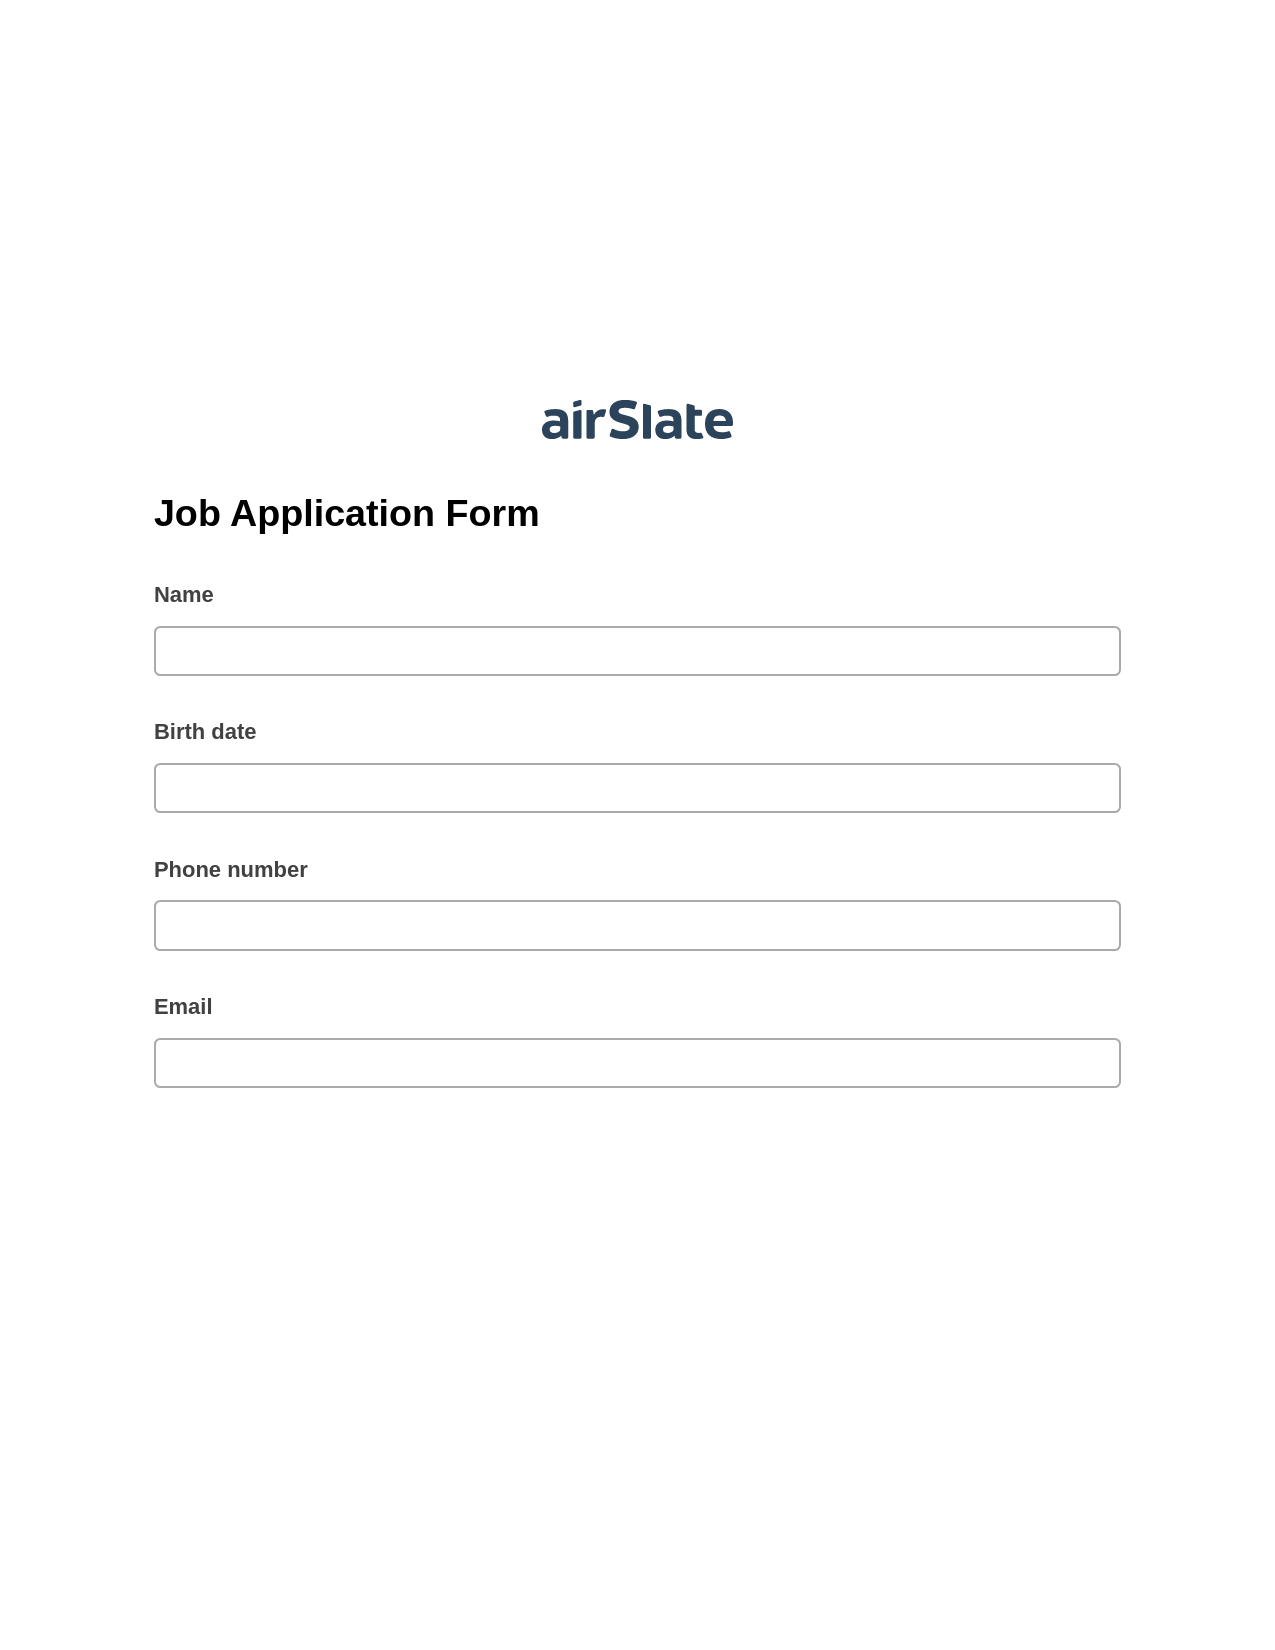 Multirole Job Application Form Pre-fill Slate from MS Dynamics 365 Records Bot, In-person Signing Bot, Archive to SharePoint Folder Bot